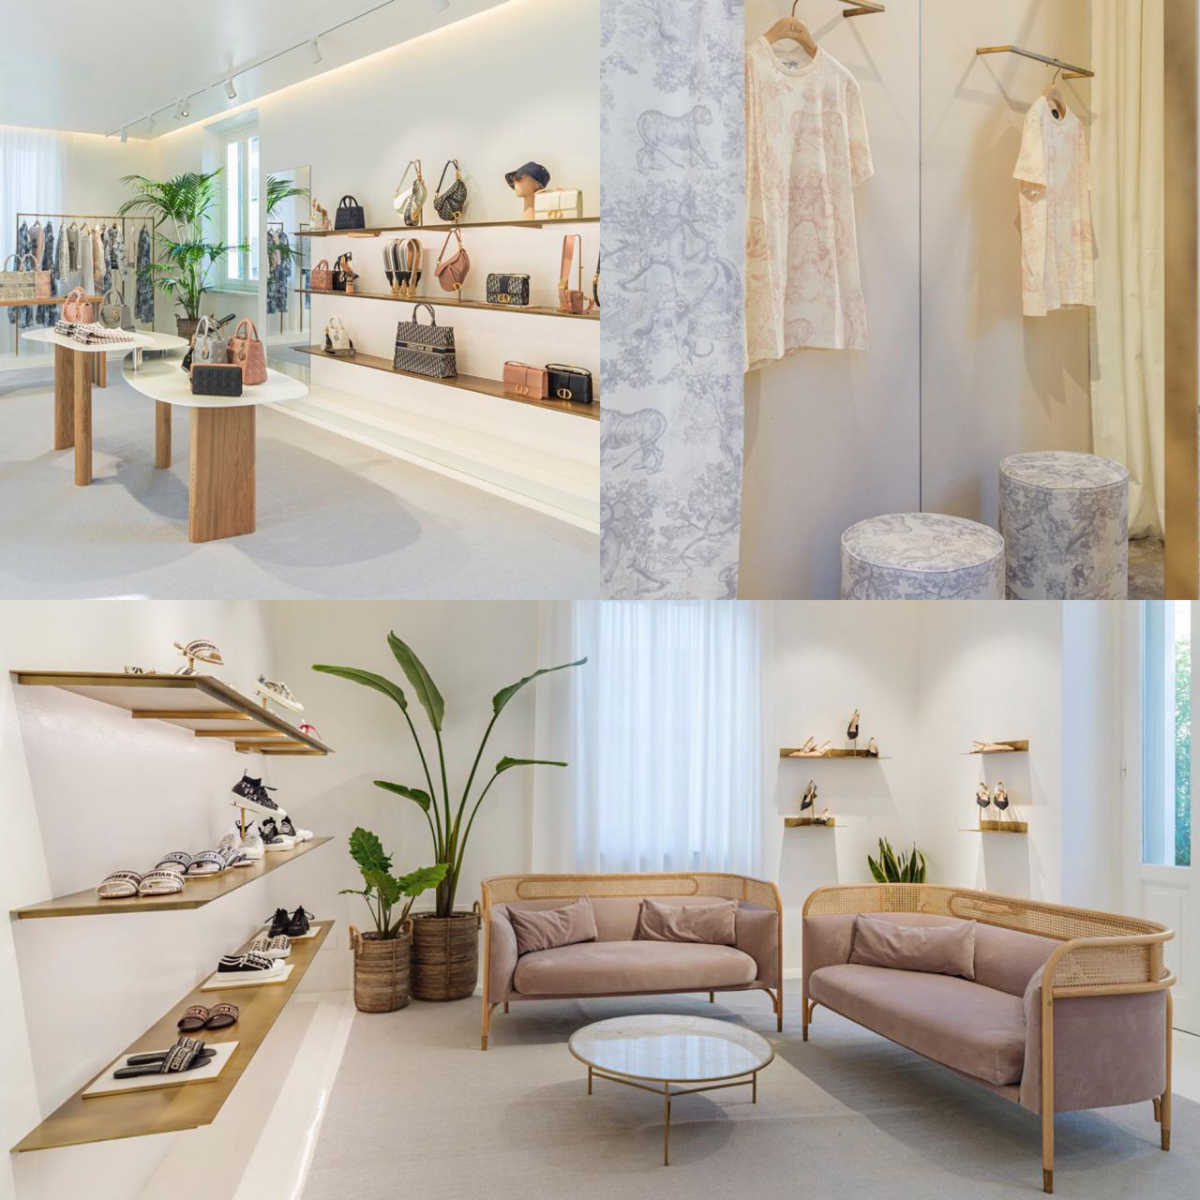 New Dior Pop up Resort in Forte dei Marmi, Italy (In pictures)